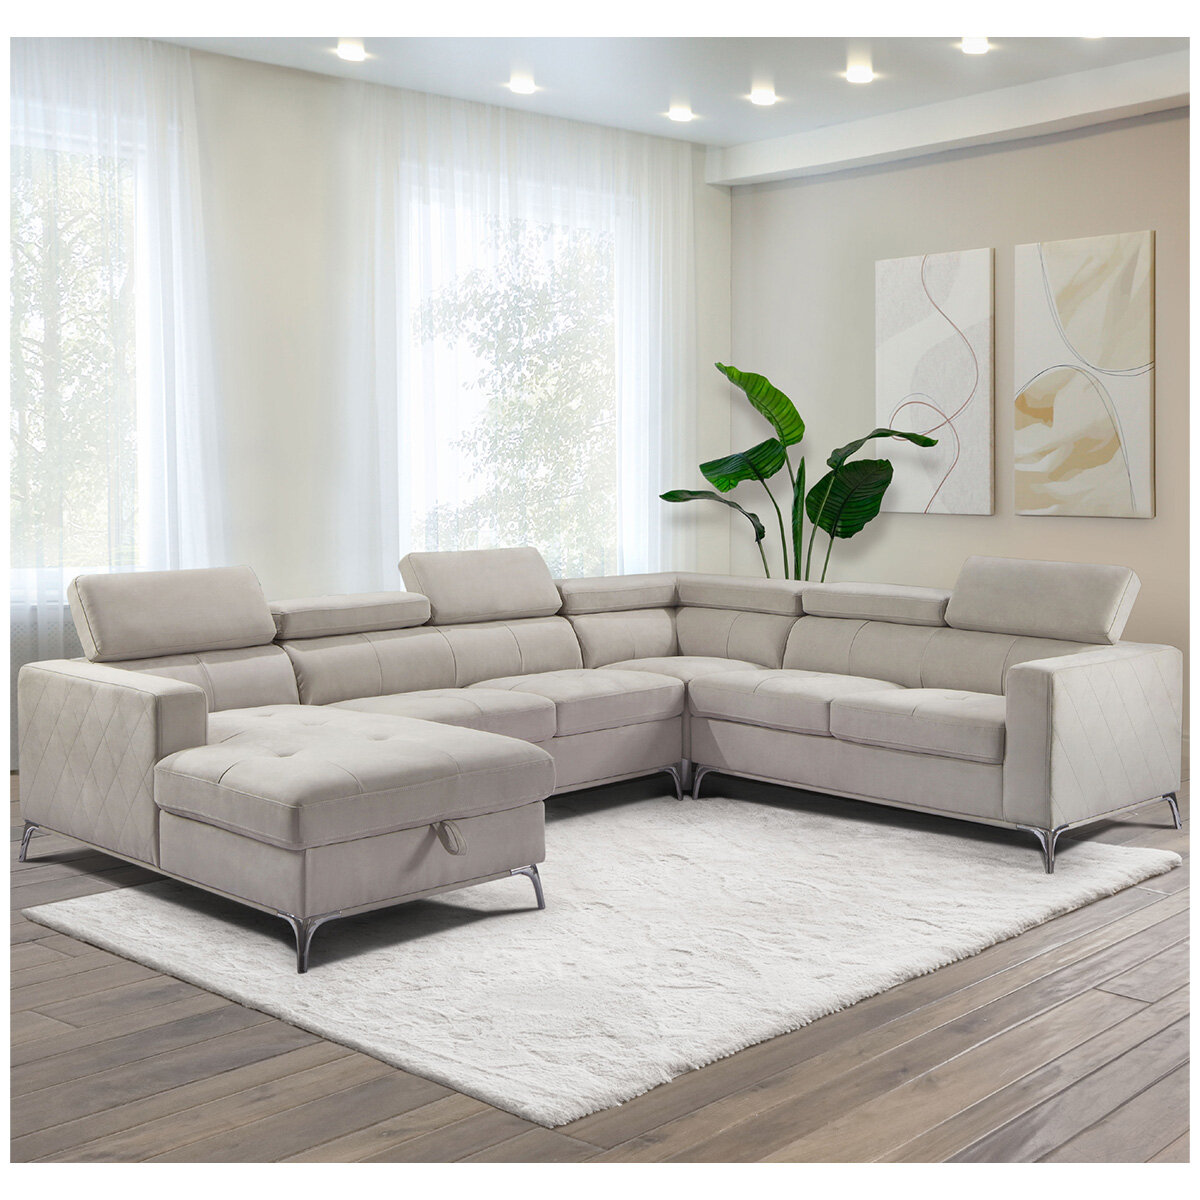 Abbyson Blaise Fabric Sectional with Storage Chaise and Adjustable Headrests Grey